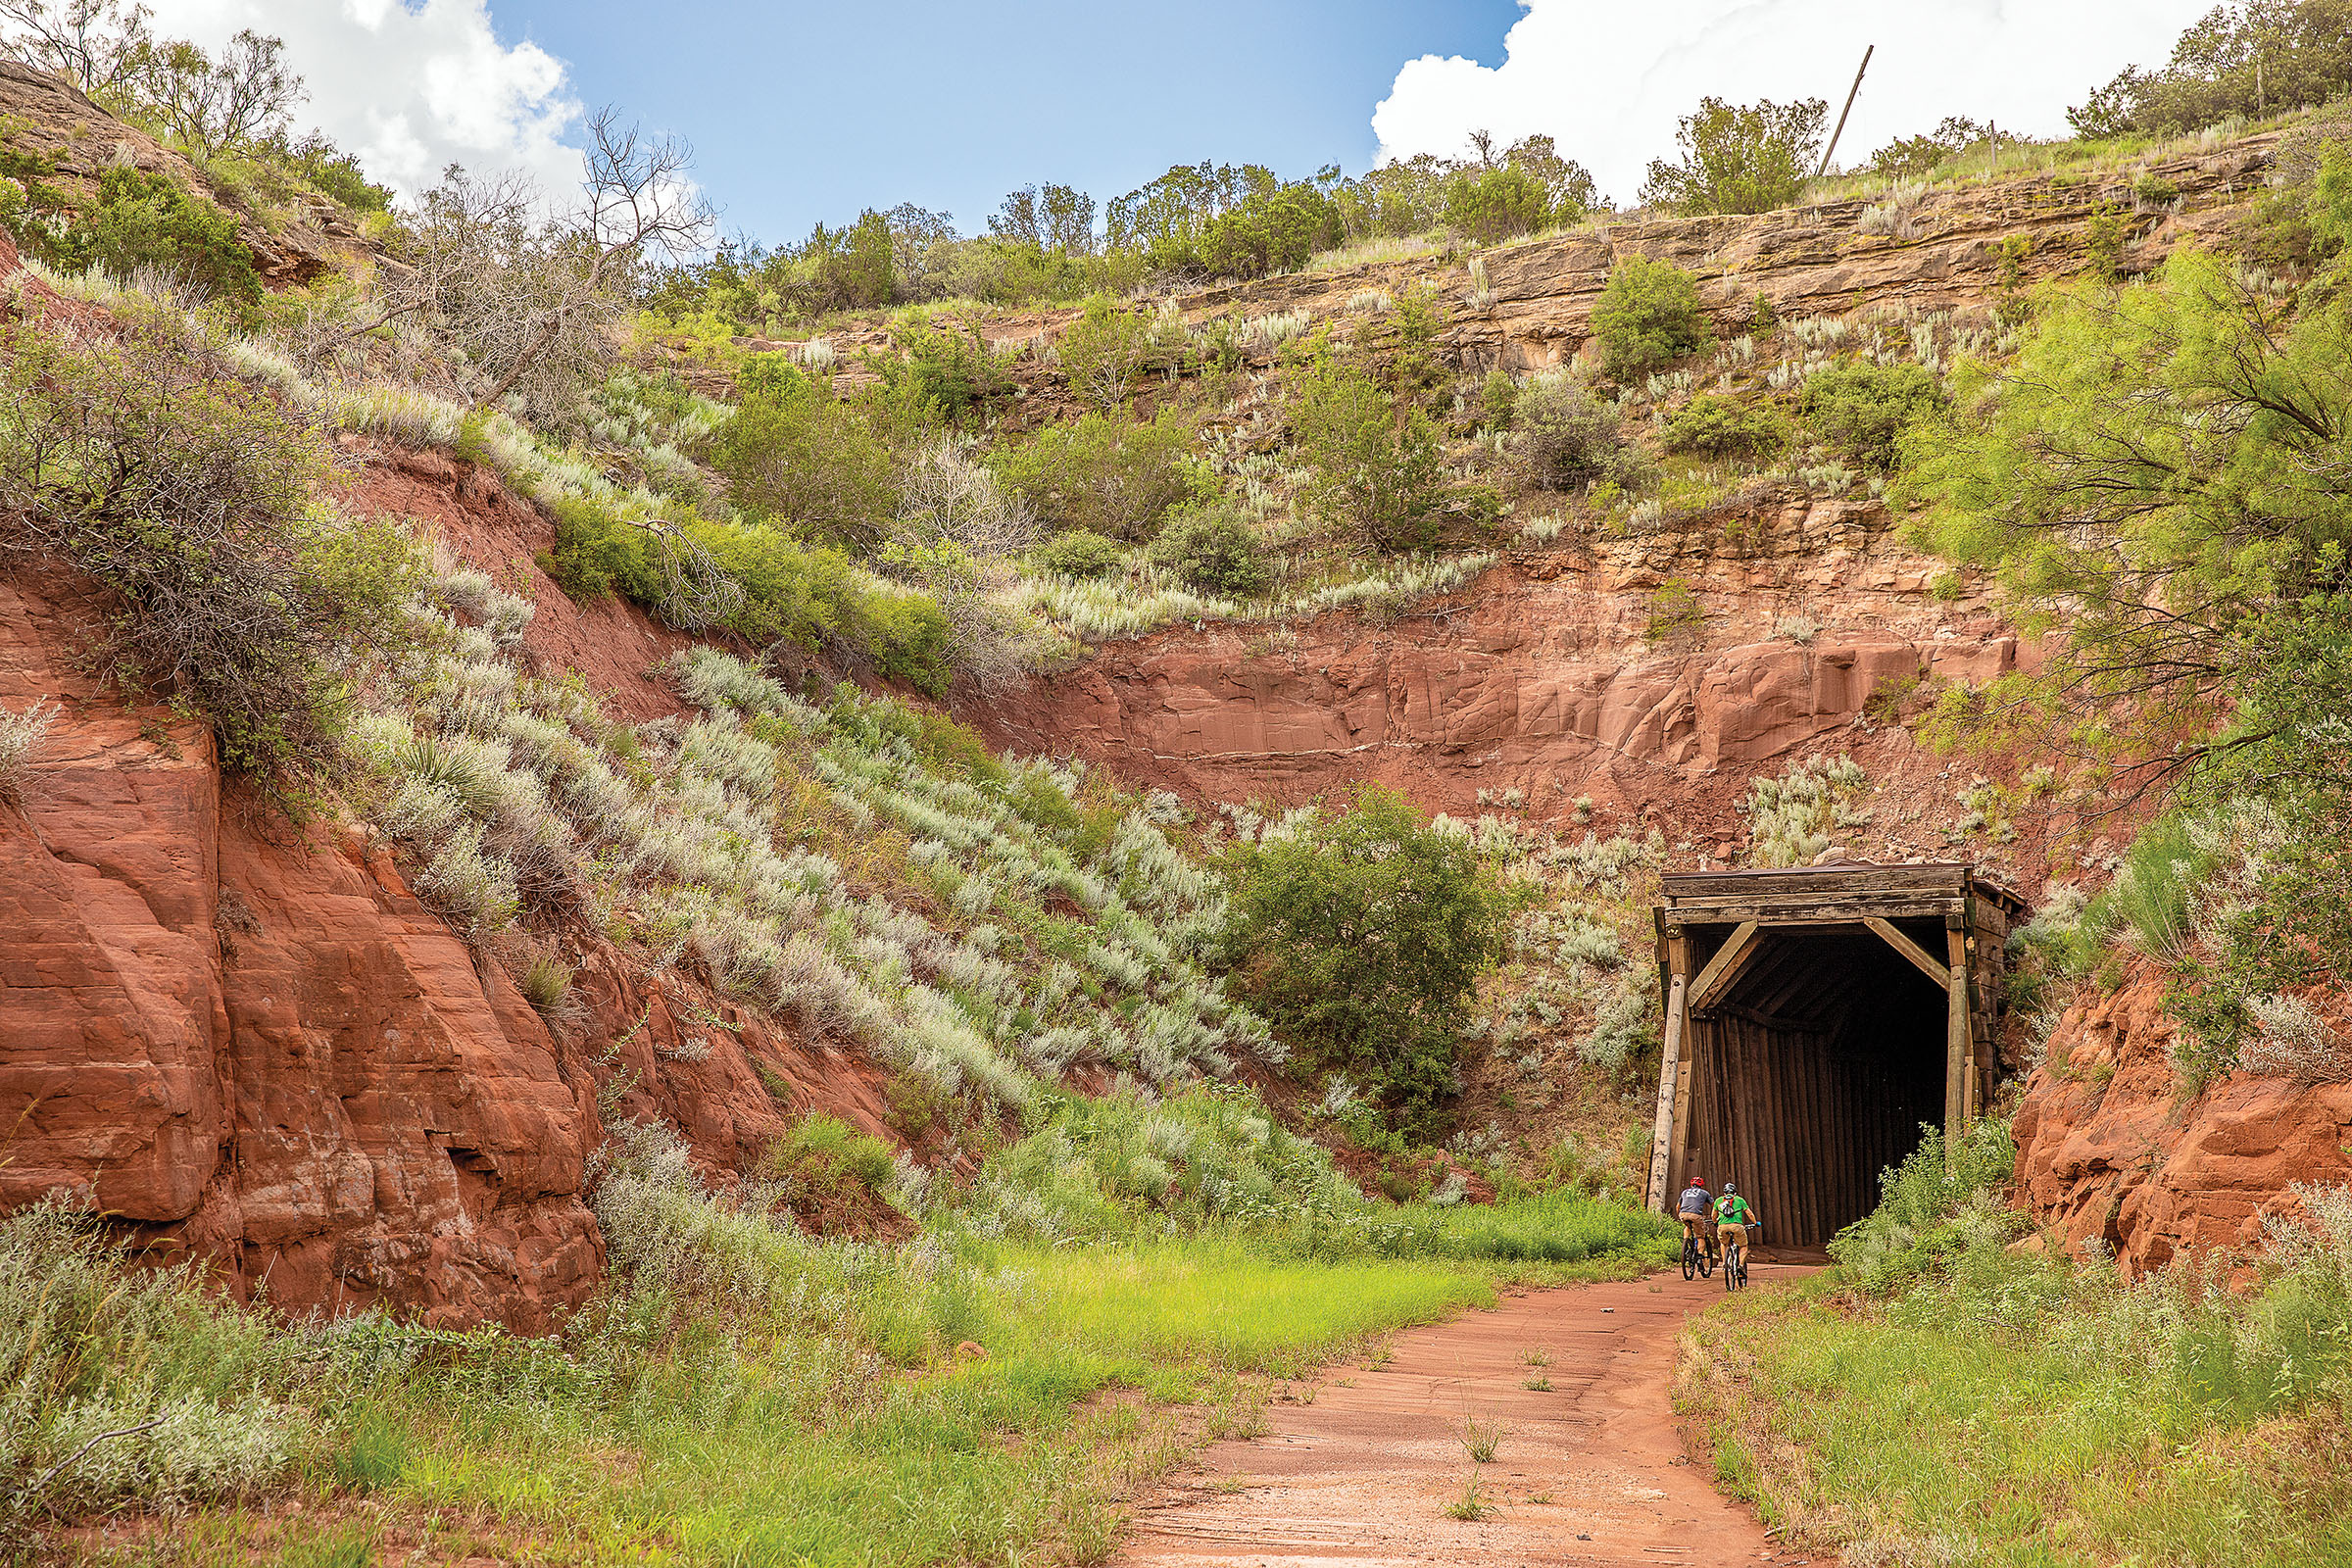 Two people ride bicycles toward the entracnce of a large tunnel inside a red and green hillside